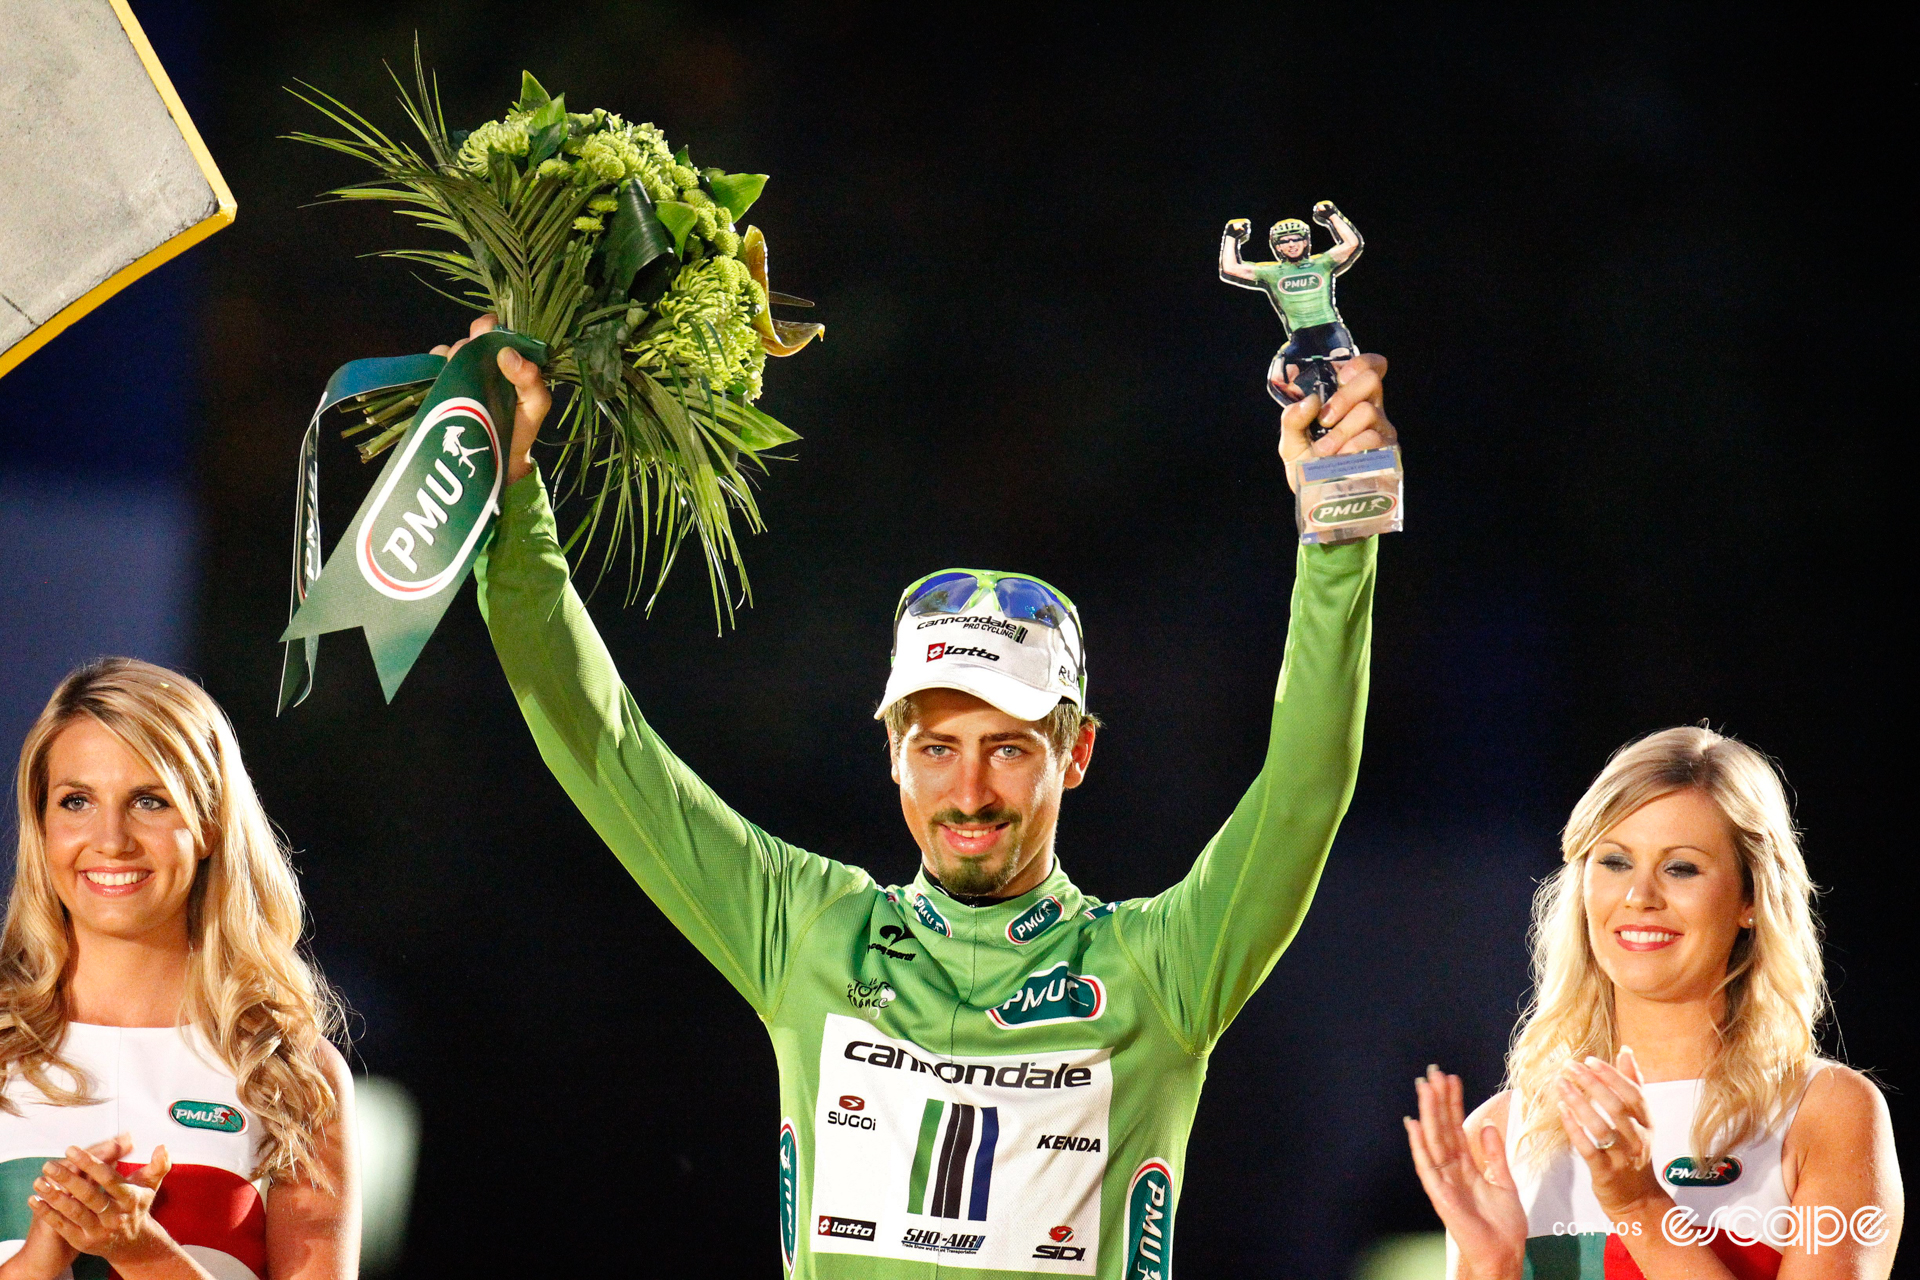 Peter Sagan on the final podium at the 2013 Tour de France, with two podium hostesses beside him, a bouquet of green flowers in one hand, and a trophy in the other.